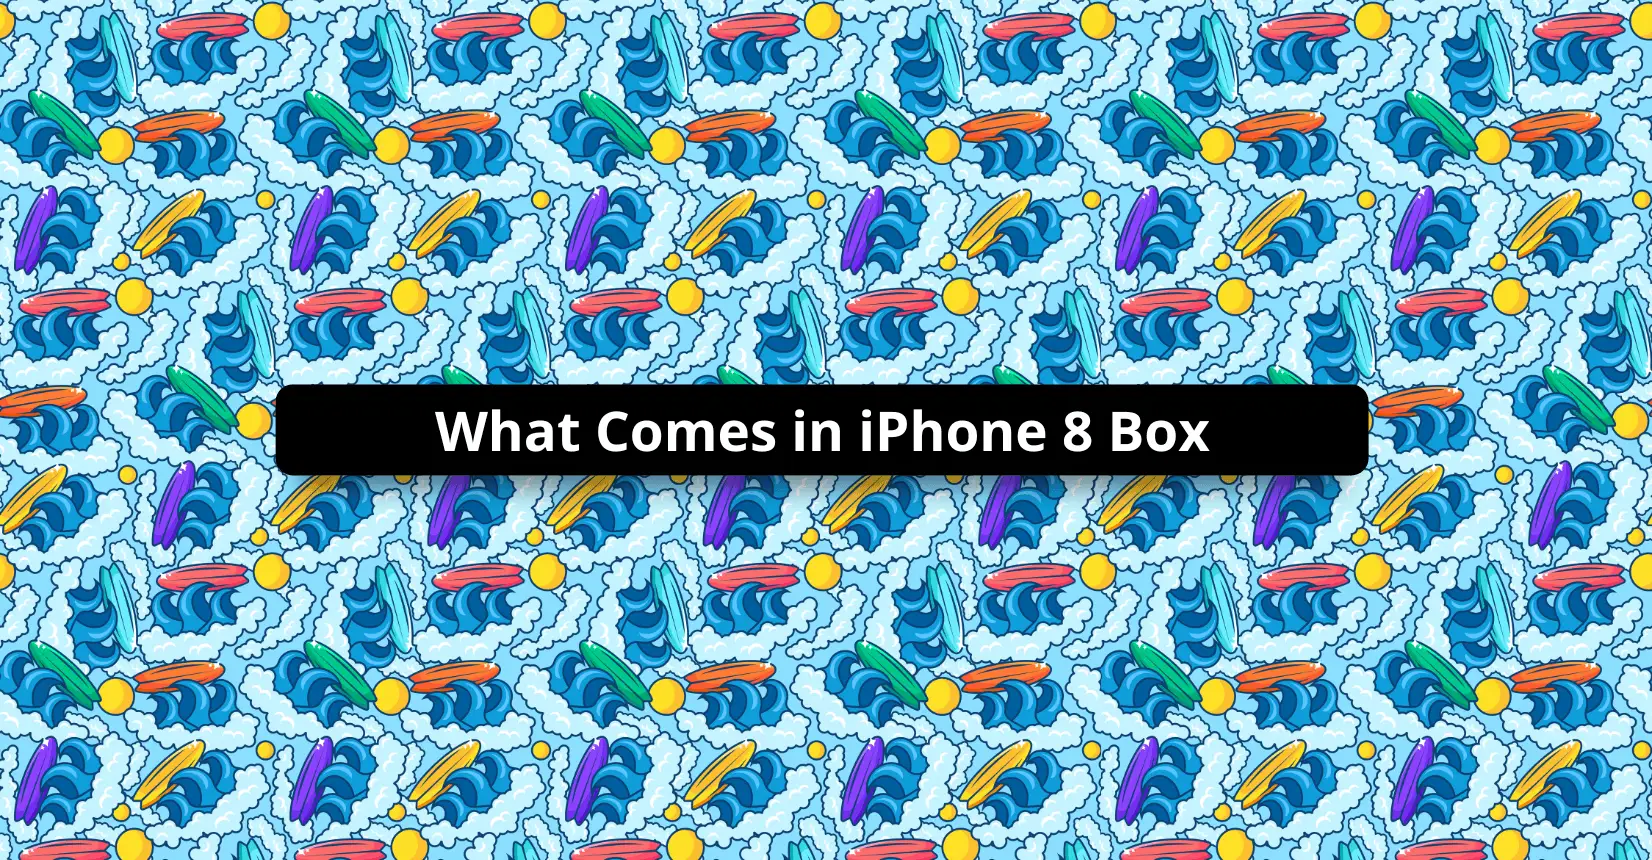 What Comes in iPhone 8 Box